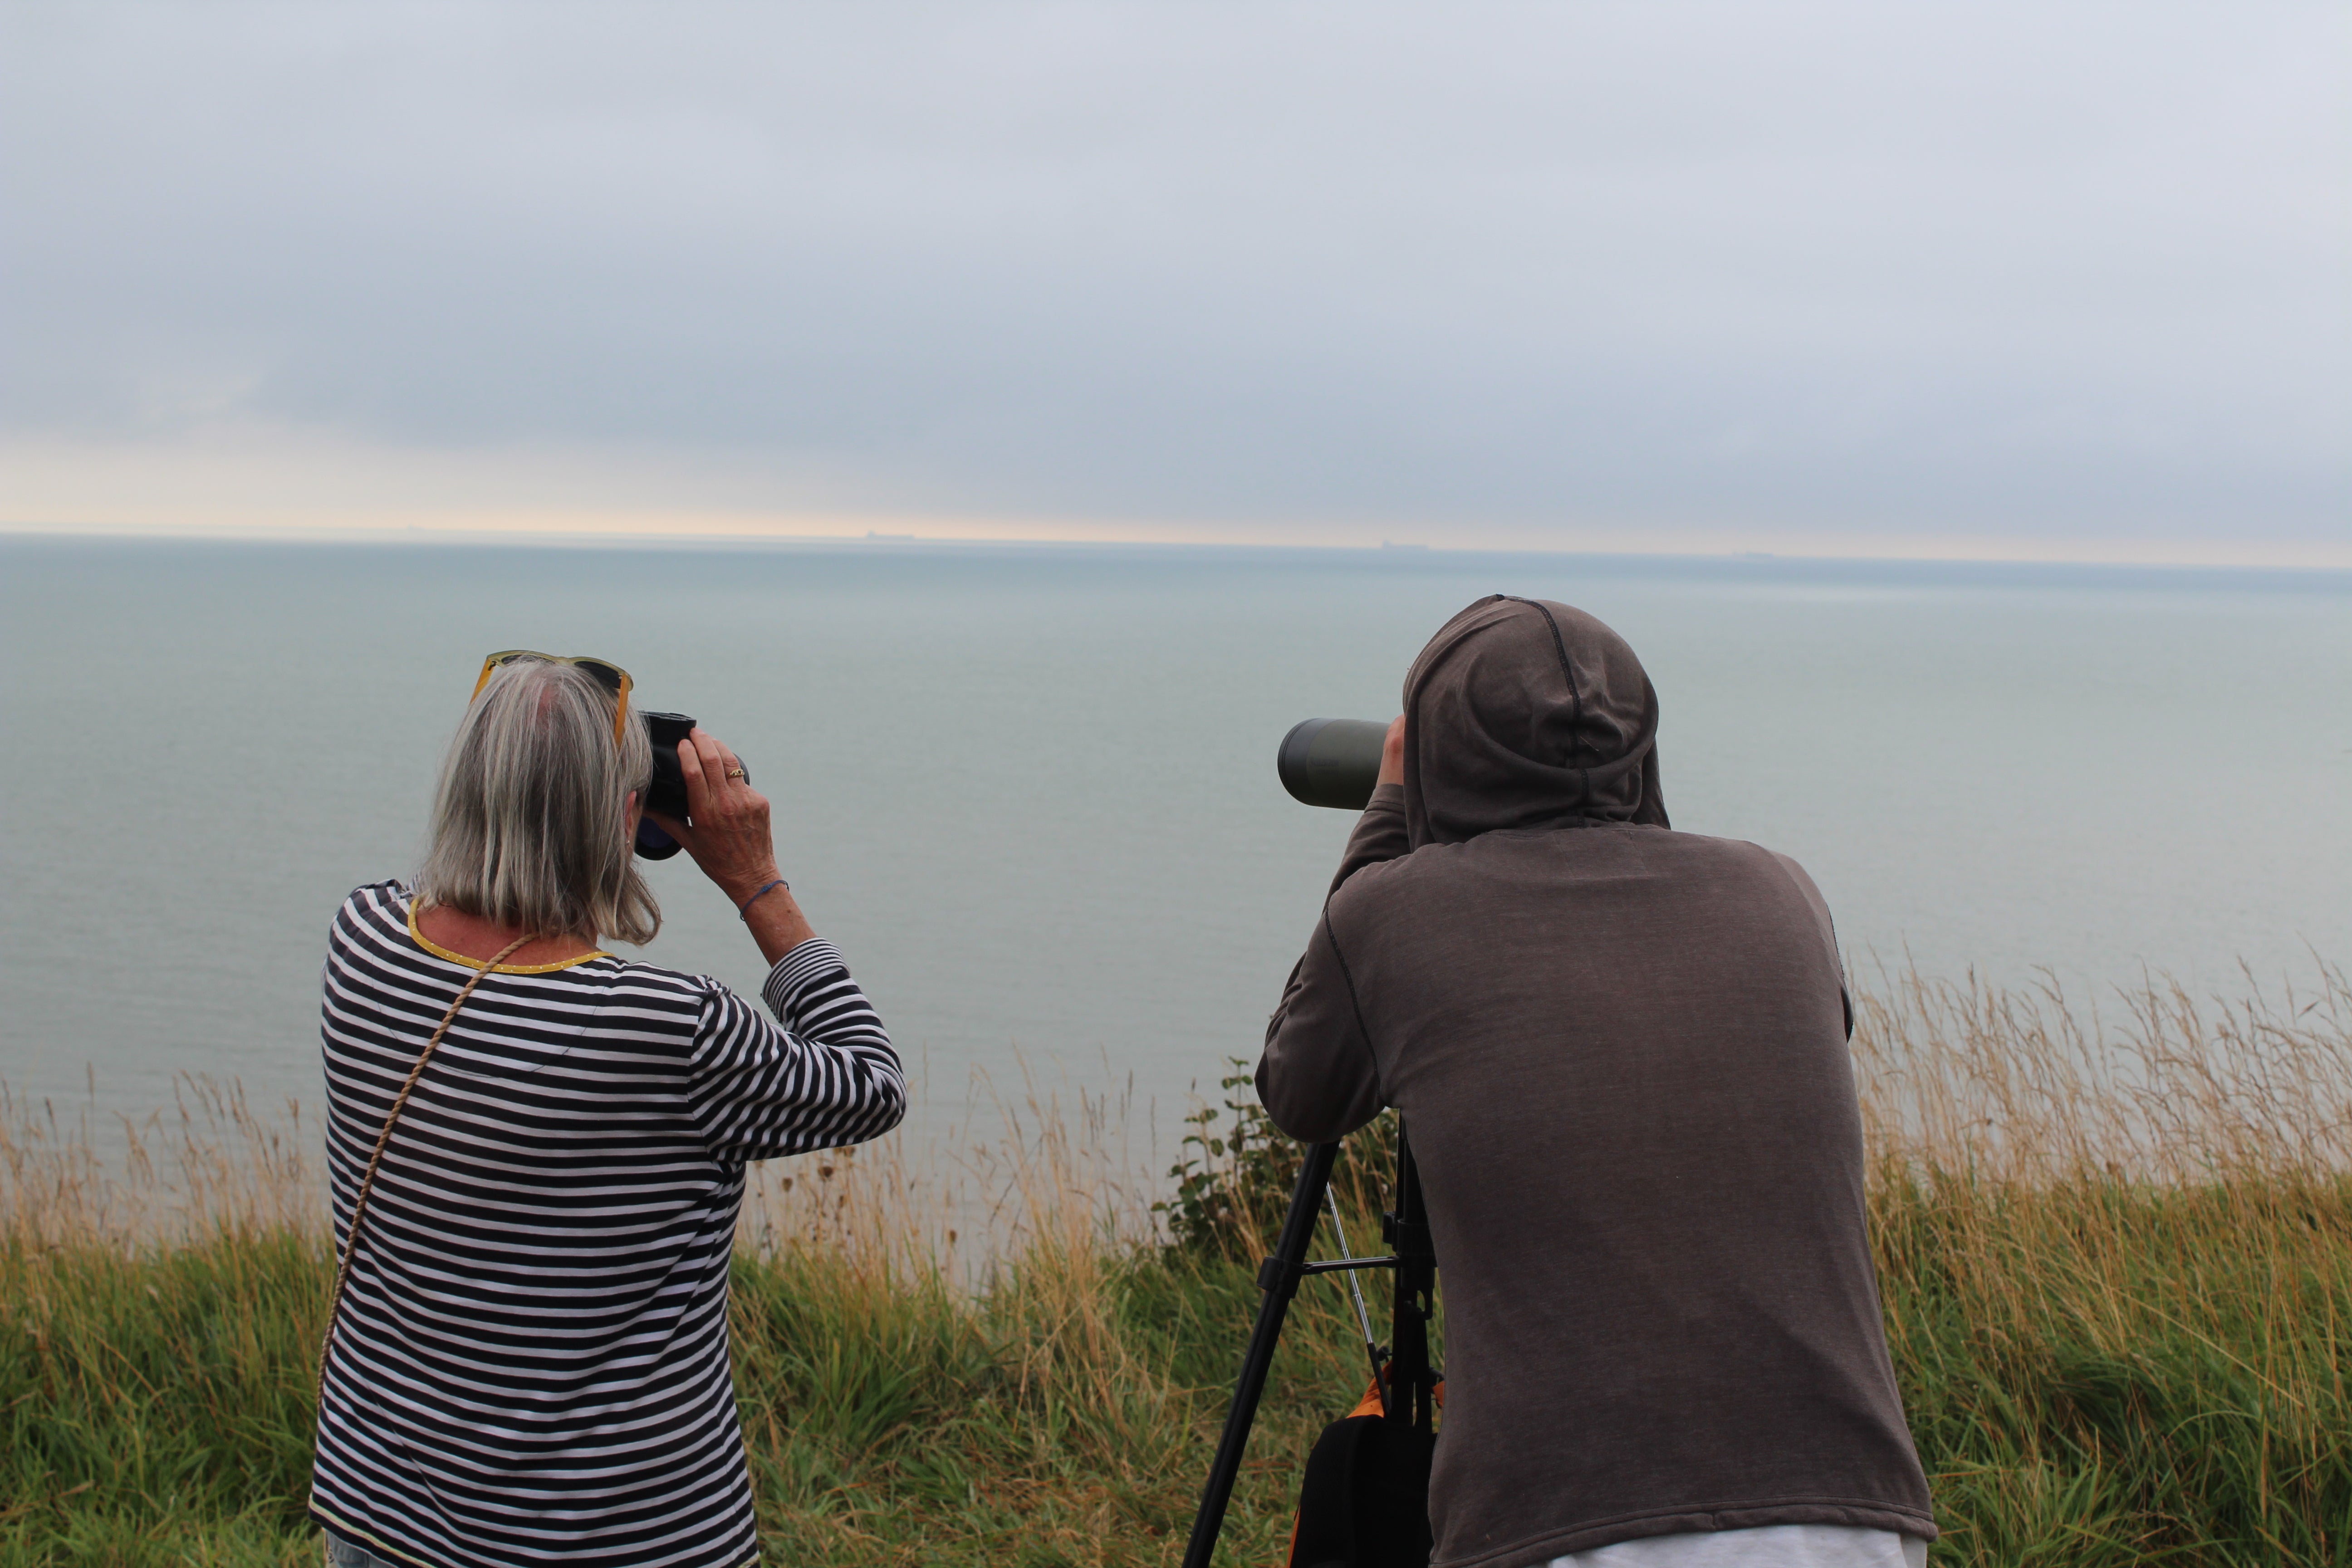 Volunteers from Channel Rescue scan the horizon for migrant boats on 10 September, 2021.